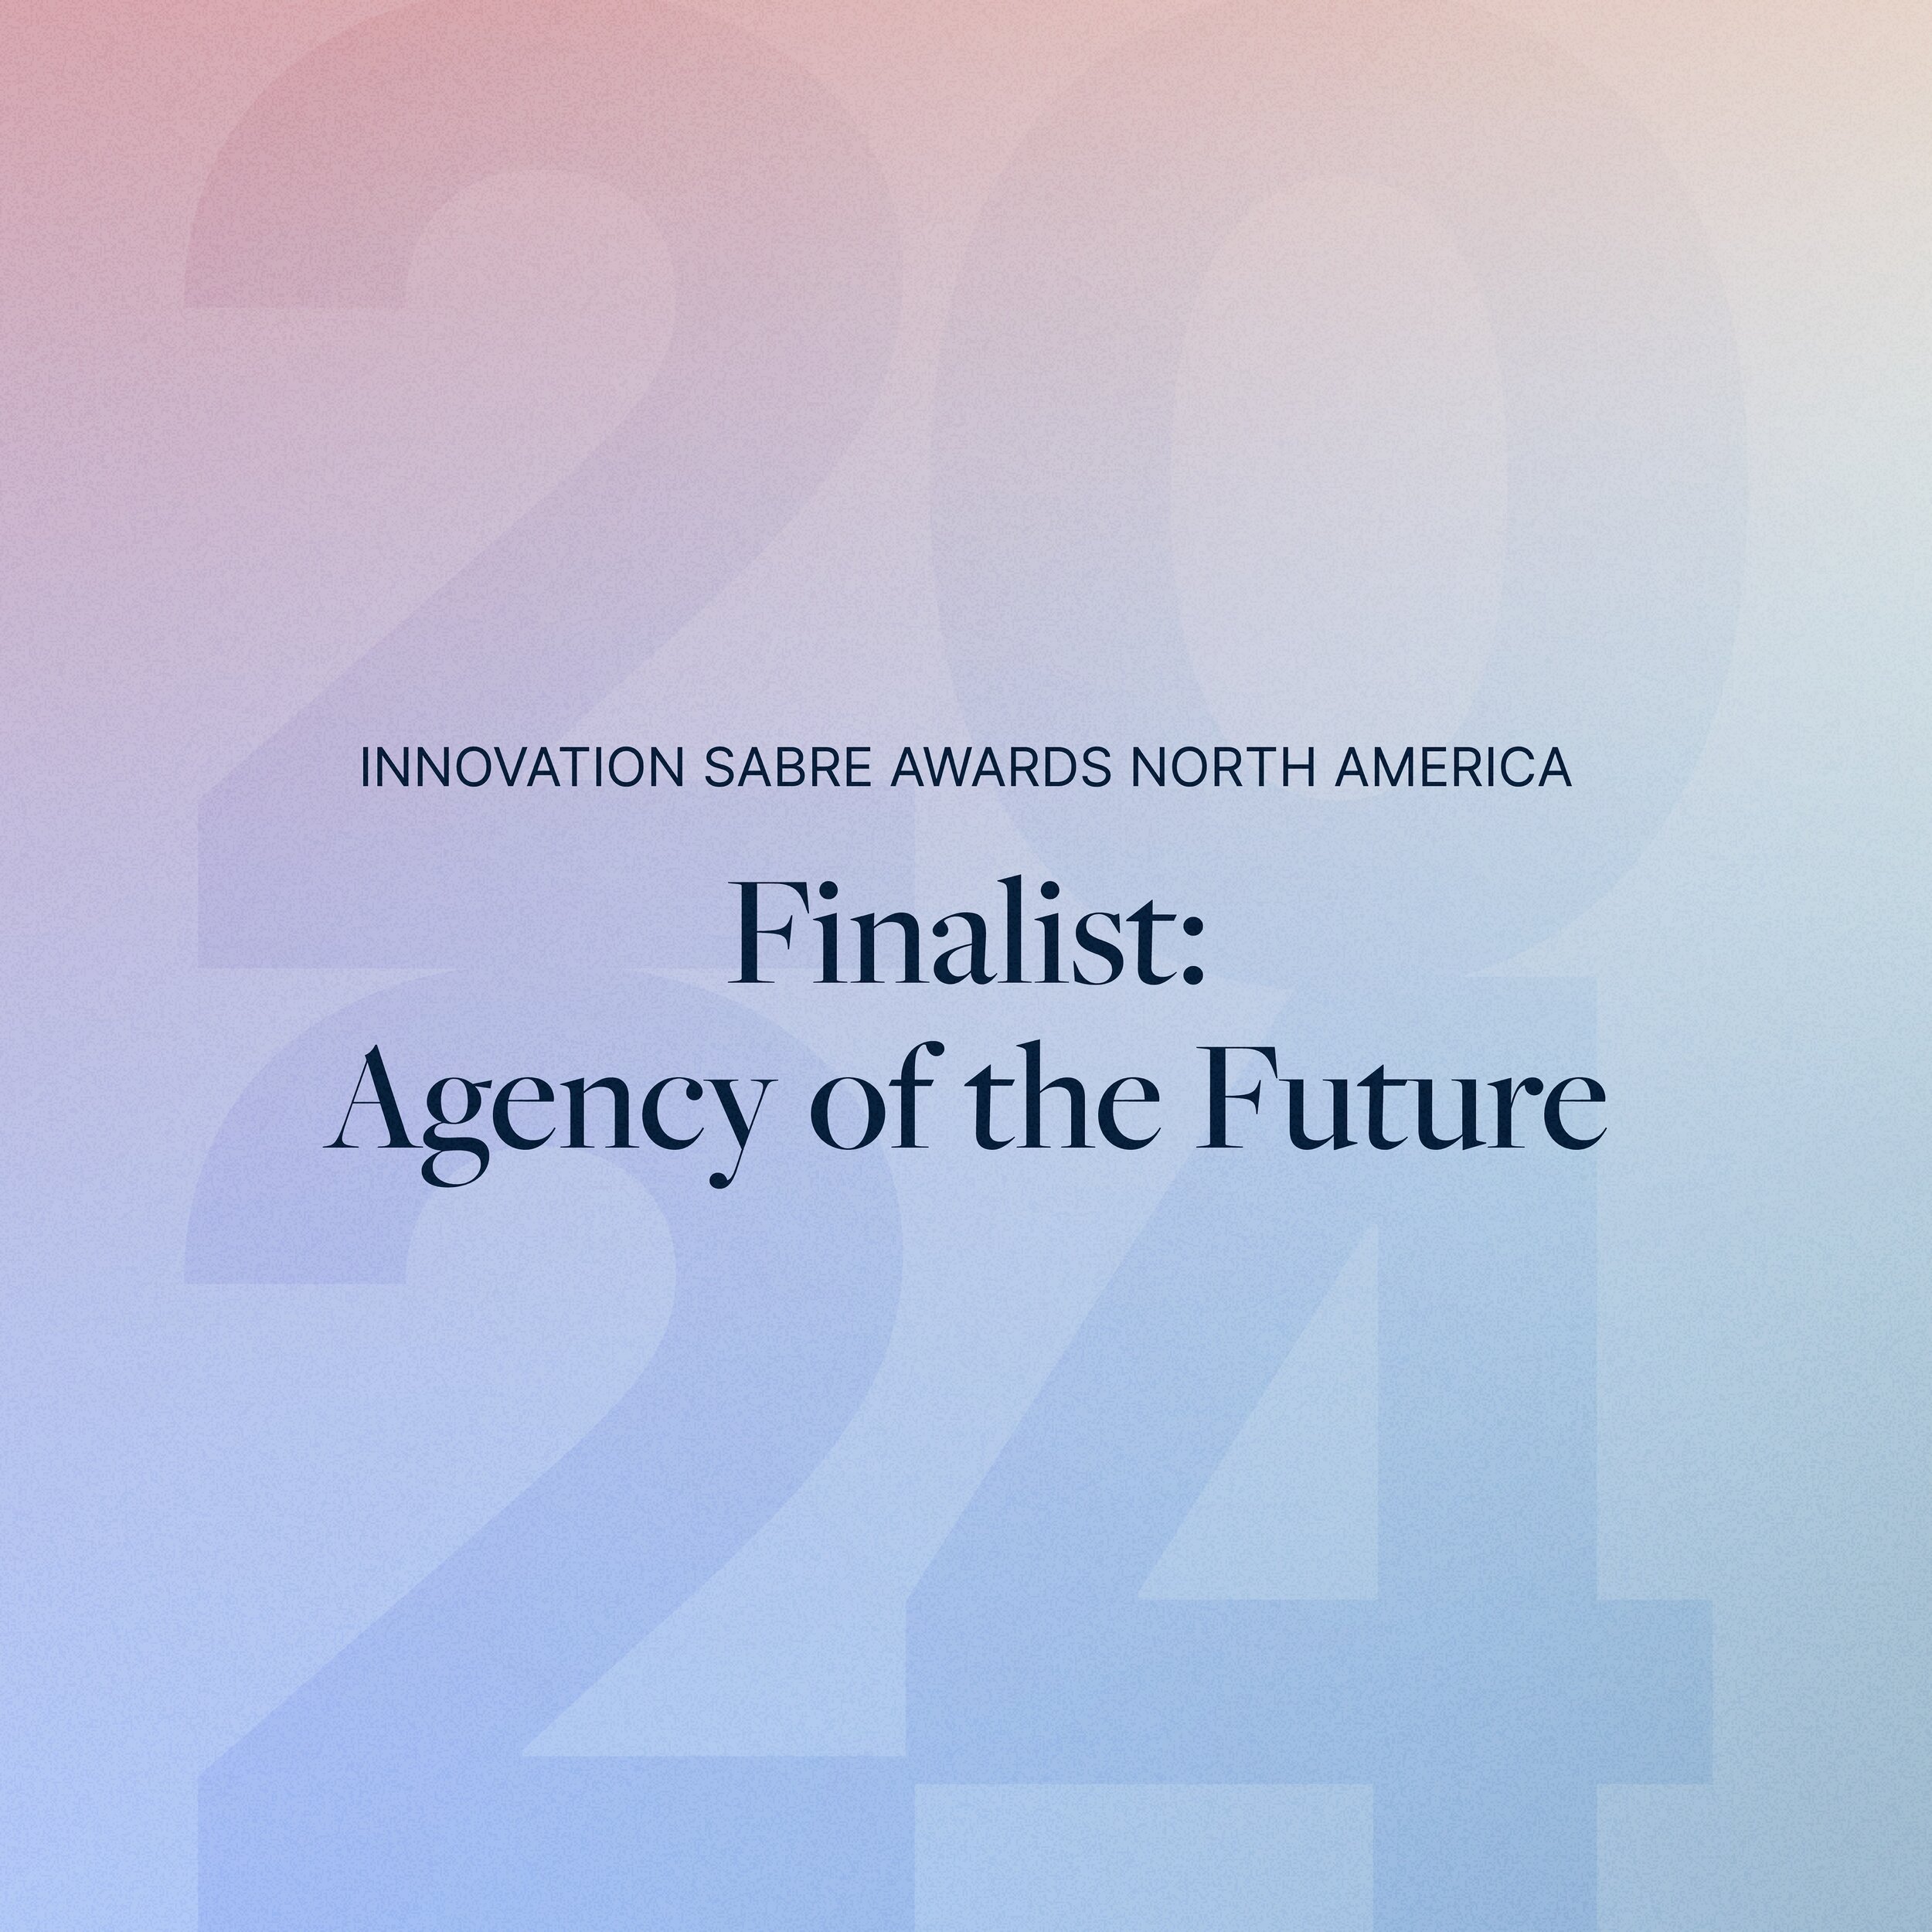 As an agency we embrace possibility every day through immersive discovery, curiosity, intentionality and evolution. We are thrilled to see our efforts recognized by @provoke_news and to be named an Agency of the Future finalist in the 2024 Innovation